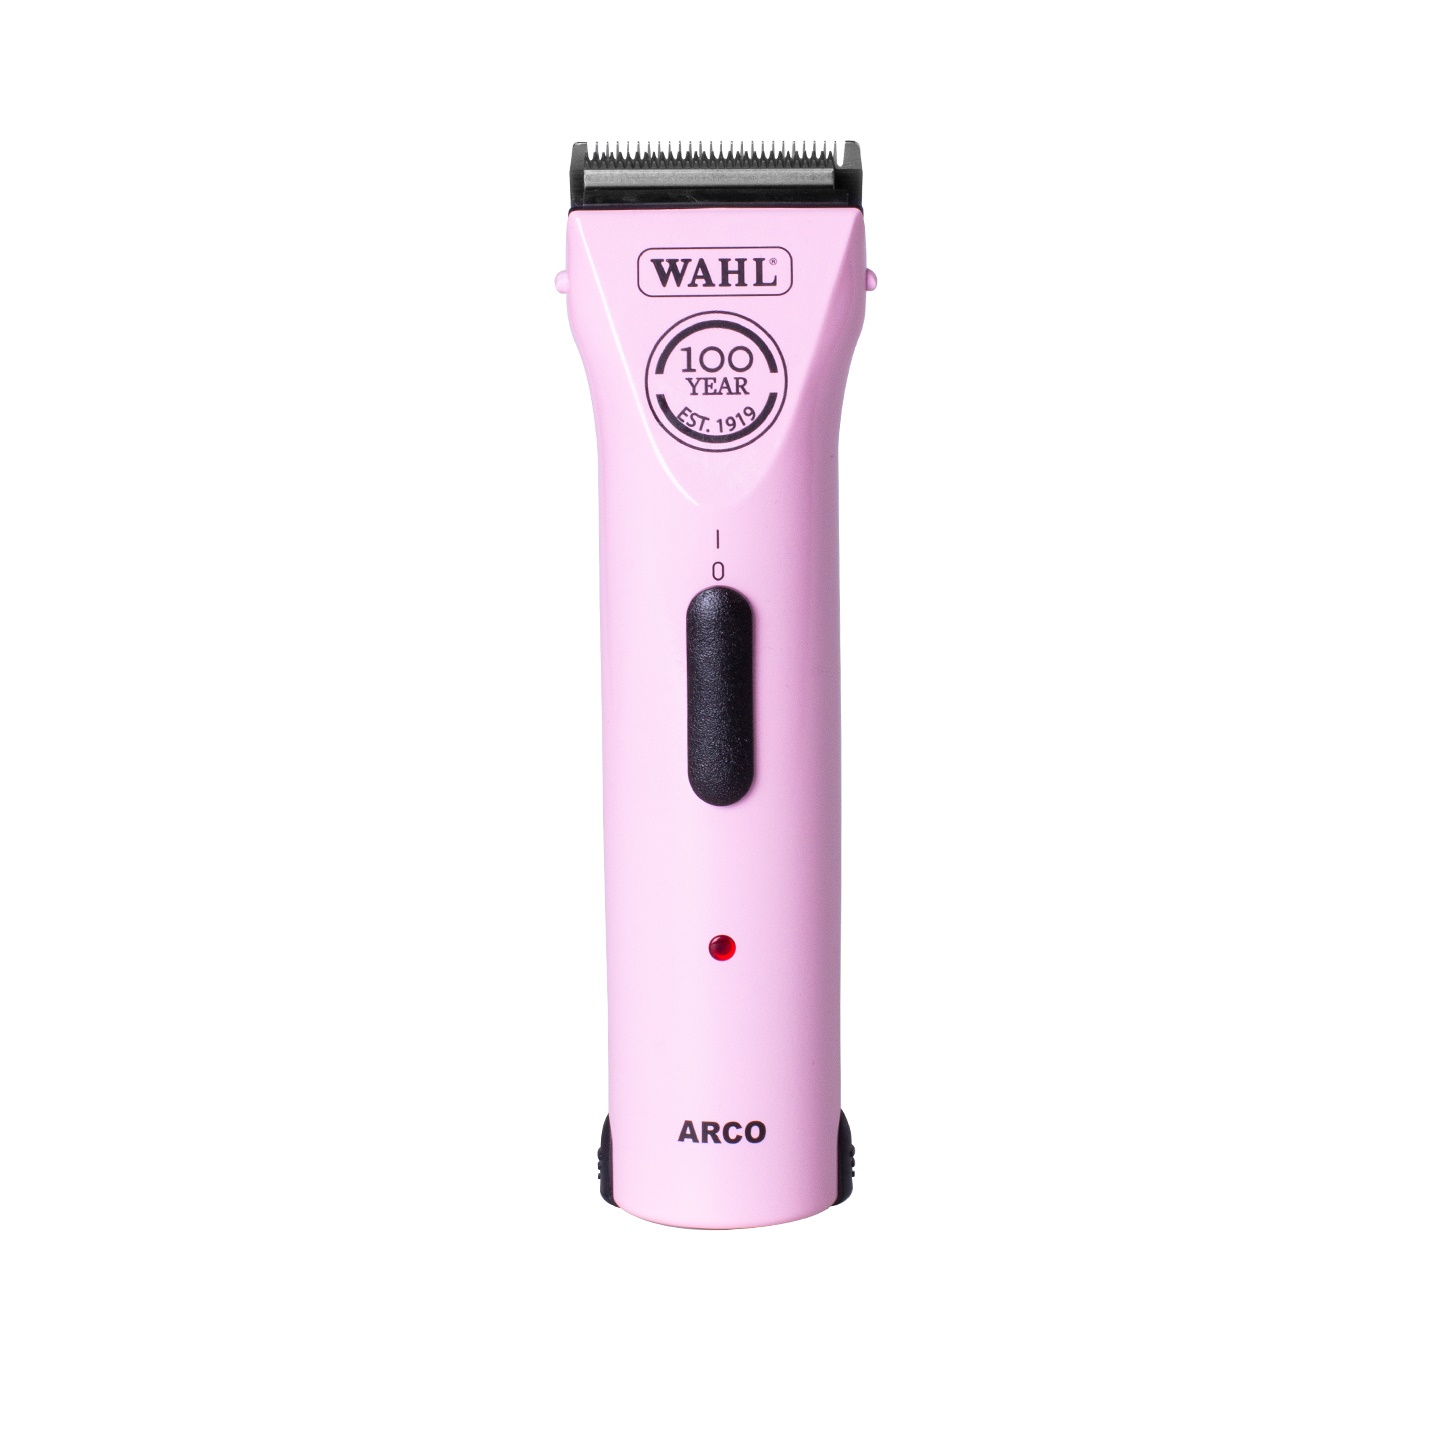 Wahl Equine ARCO Professional Cordless Clipper Kit by Wahl Professional Animal #8786-800 by Wahl - 1